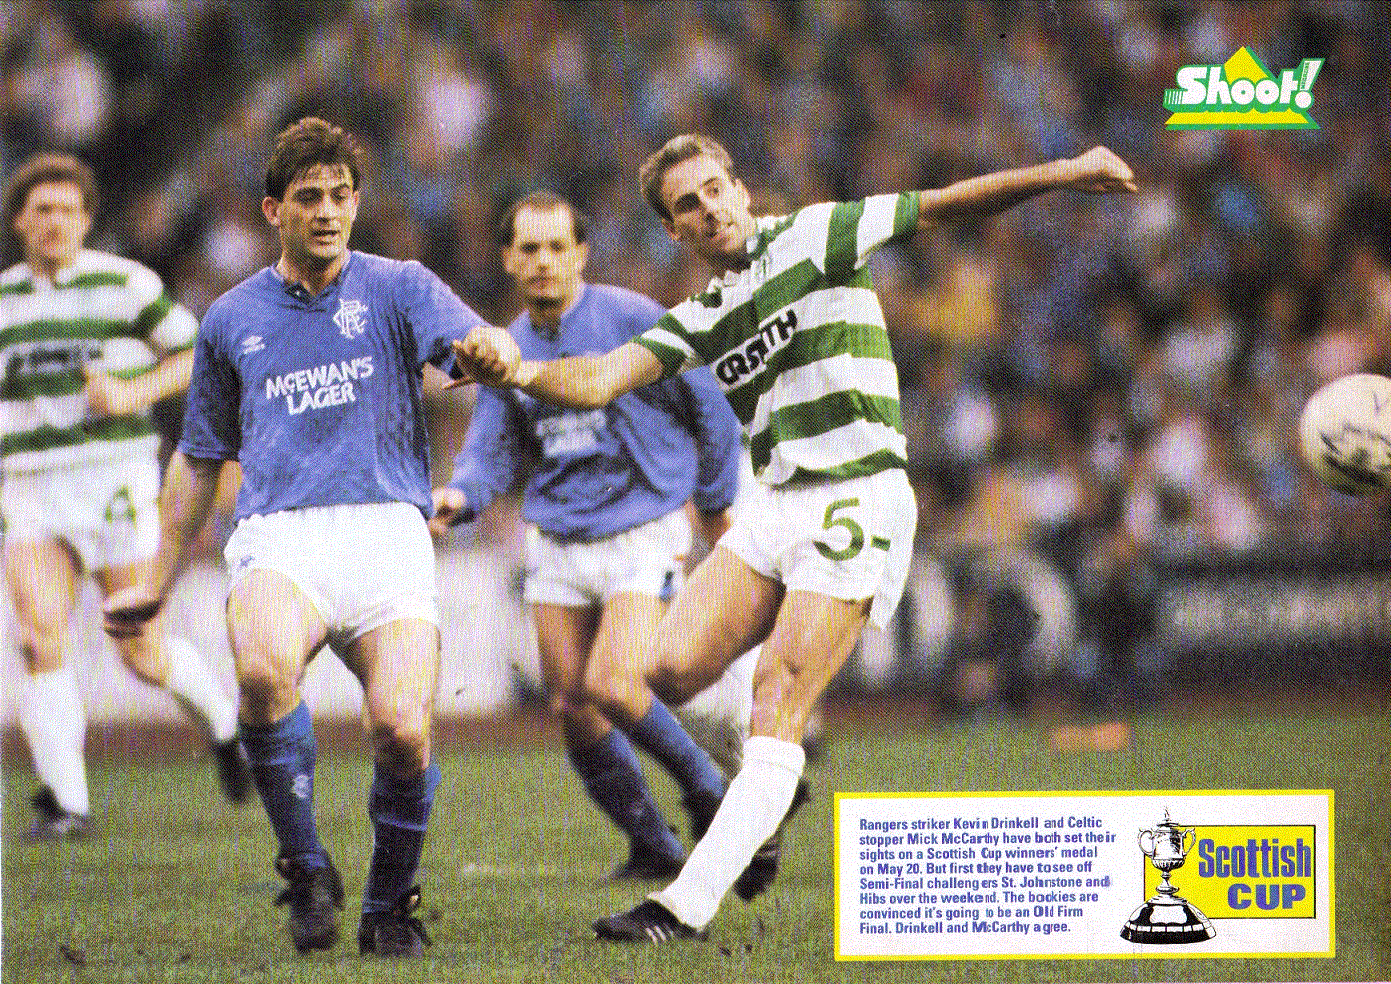 The Bhoy In The Picture: Mick McCarthy